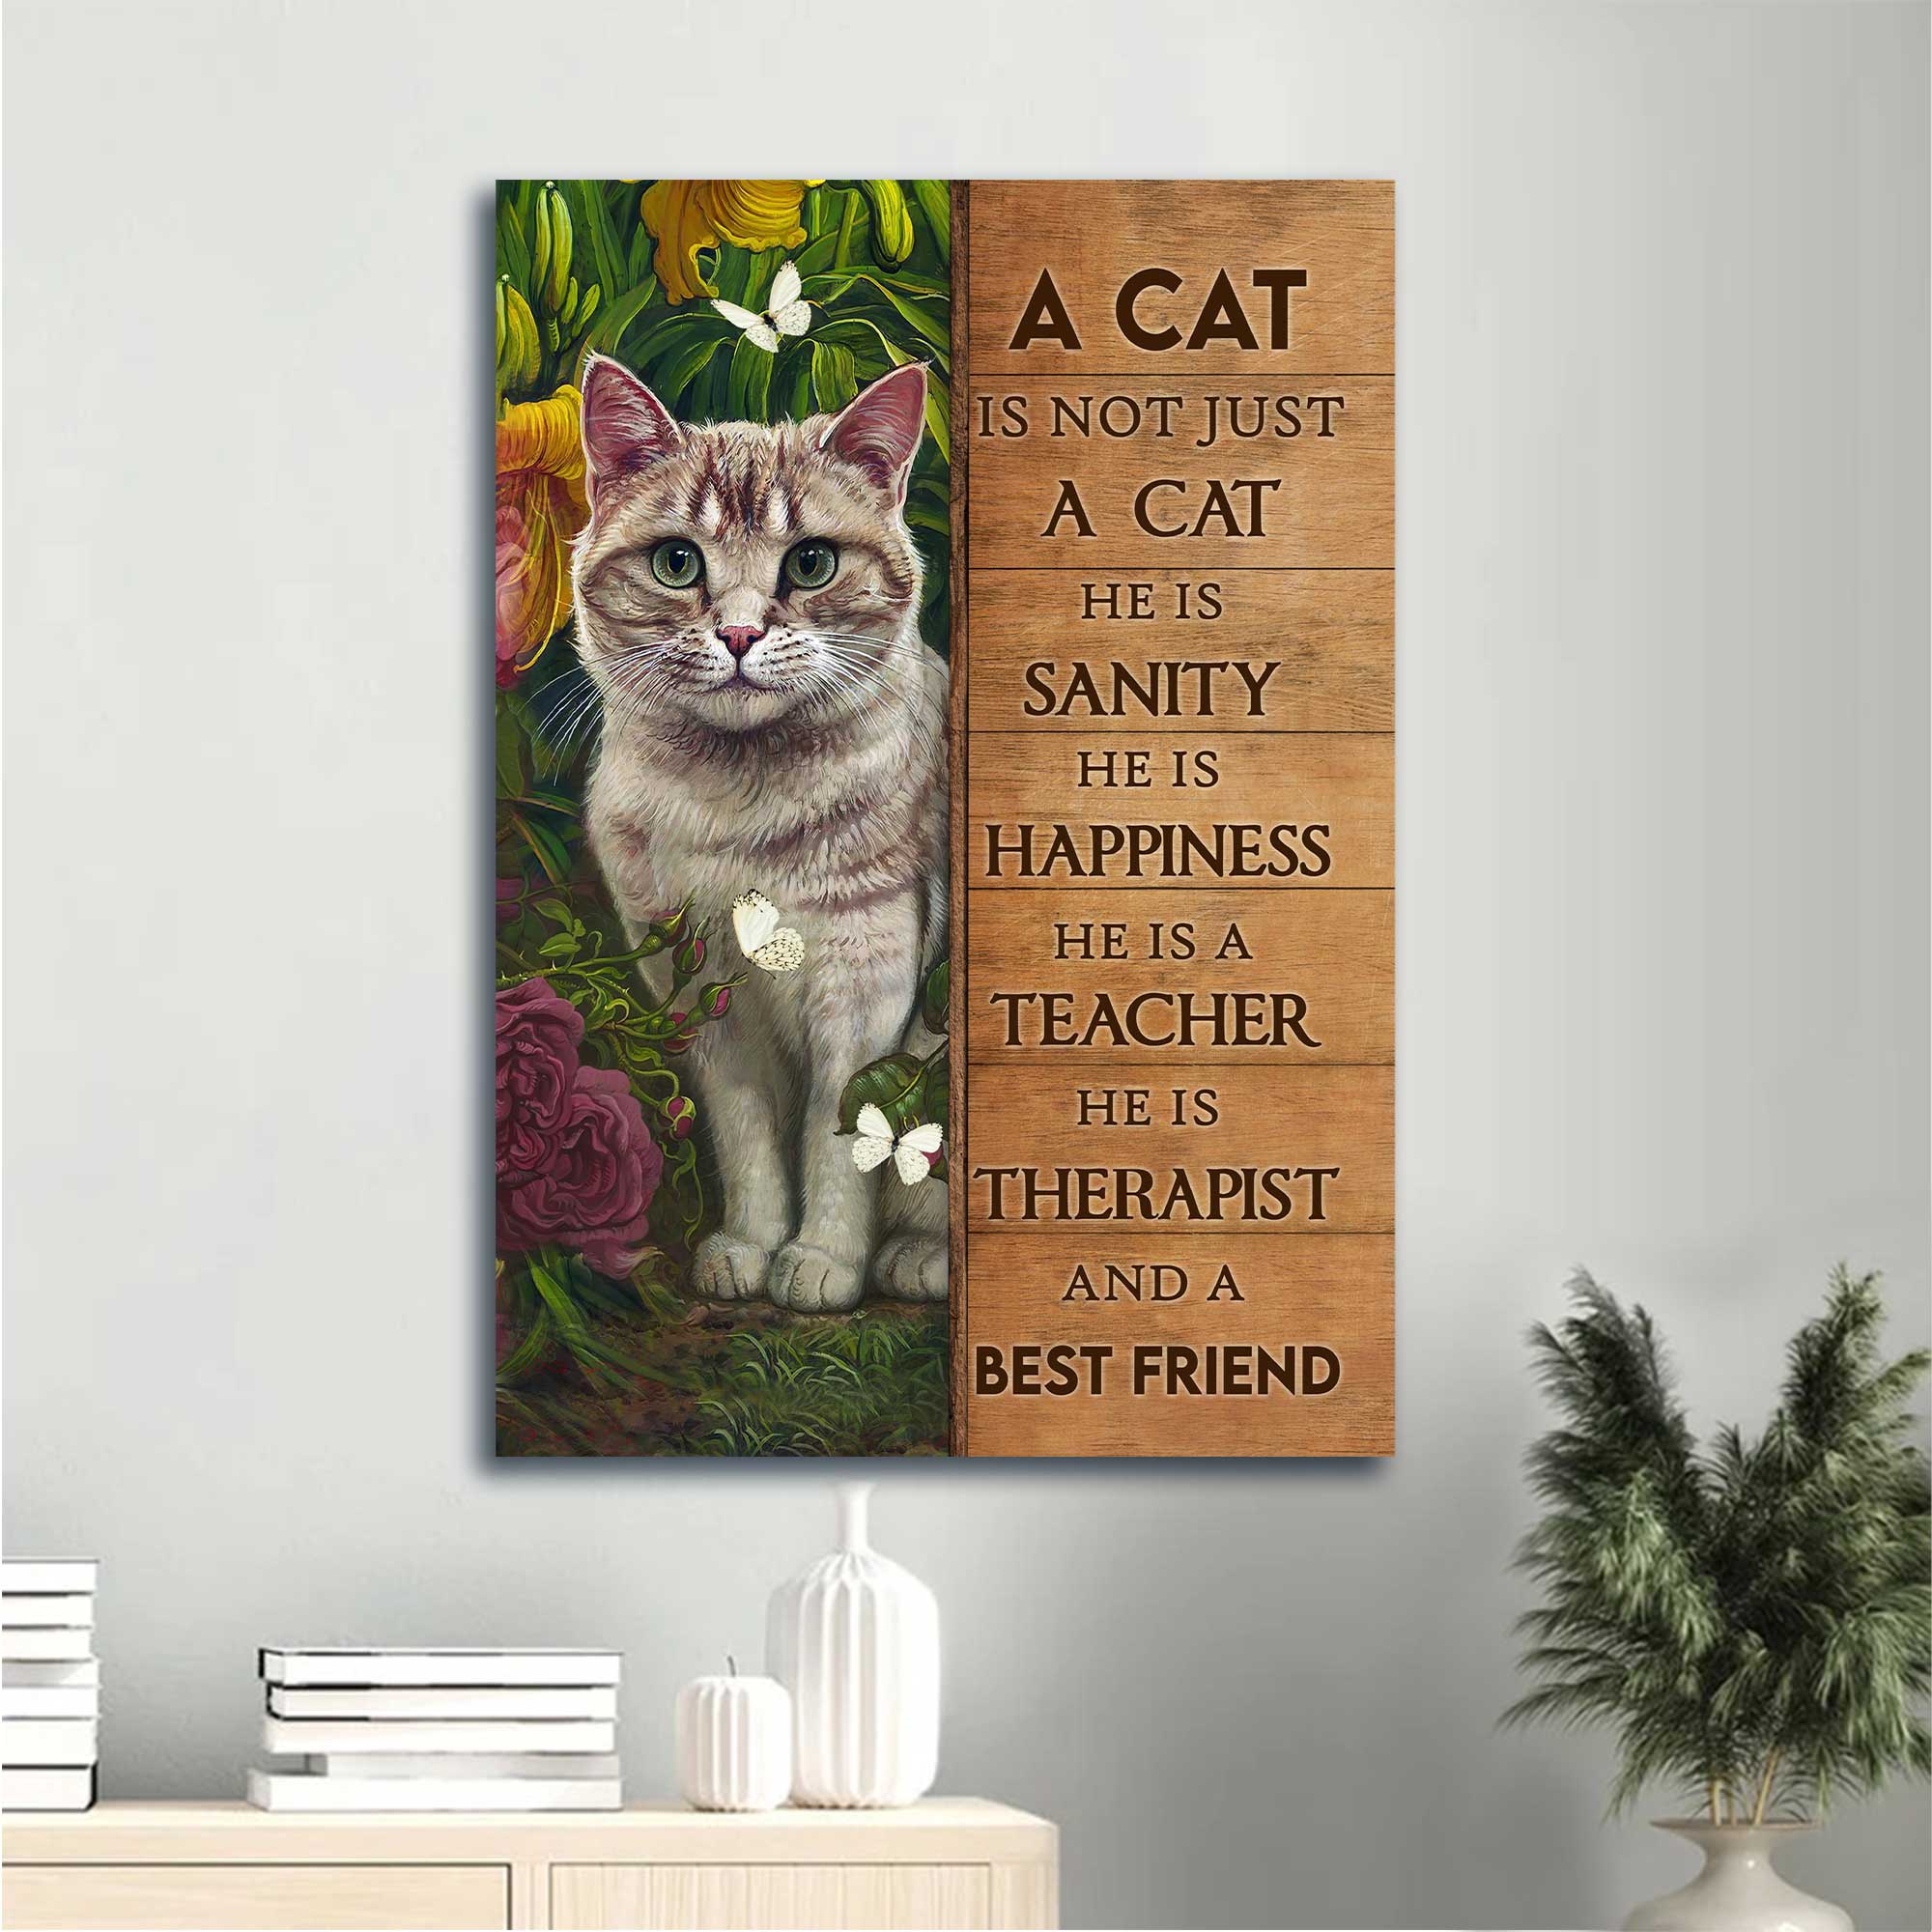 Jesus Portrait Canvas - Beautiful Cat Drawing, Flower Garden, Butterfly Portrait Canvas - Gift For Christian - A Cat Is Not Just A Cat